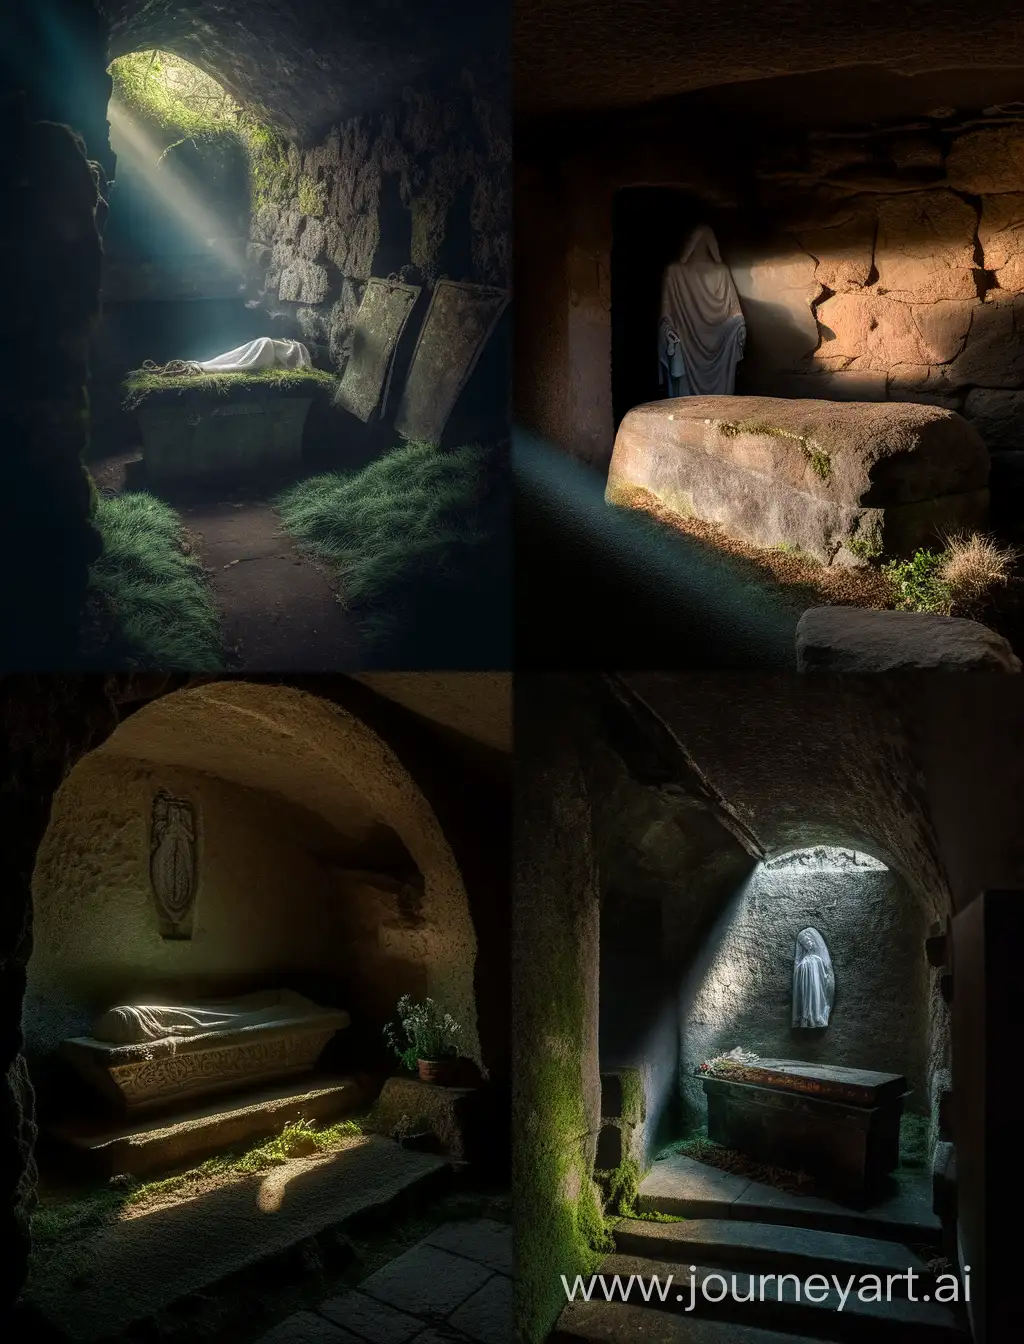 In a dimly lit sepulcher, the scene unfolds as Jesus rises from the cold stone slab. The tomb's weathered texture contrasts with the ethereal glow emanating from the figure in a simple, linen burial shroud. The background reveals ancient stone walls, moss-covered and aged. A subtle dawn light pierces through the entrance, casting a symbolic warmth on the resurrection scene. The simplicity of the costume and setting captures the profound moment of rebirth.